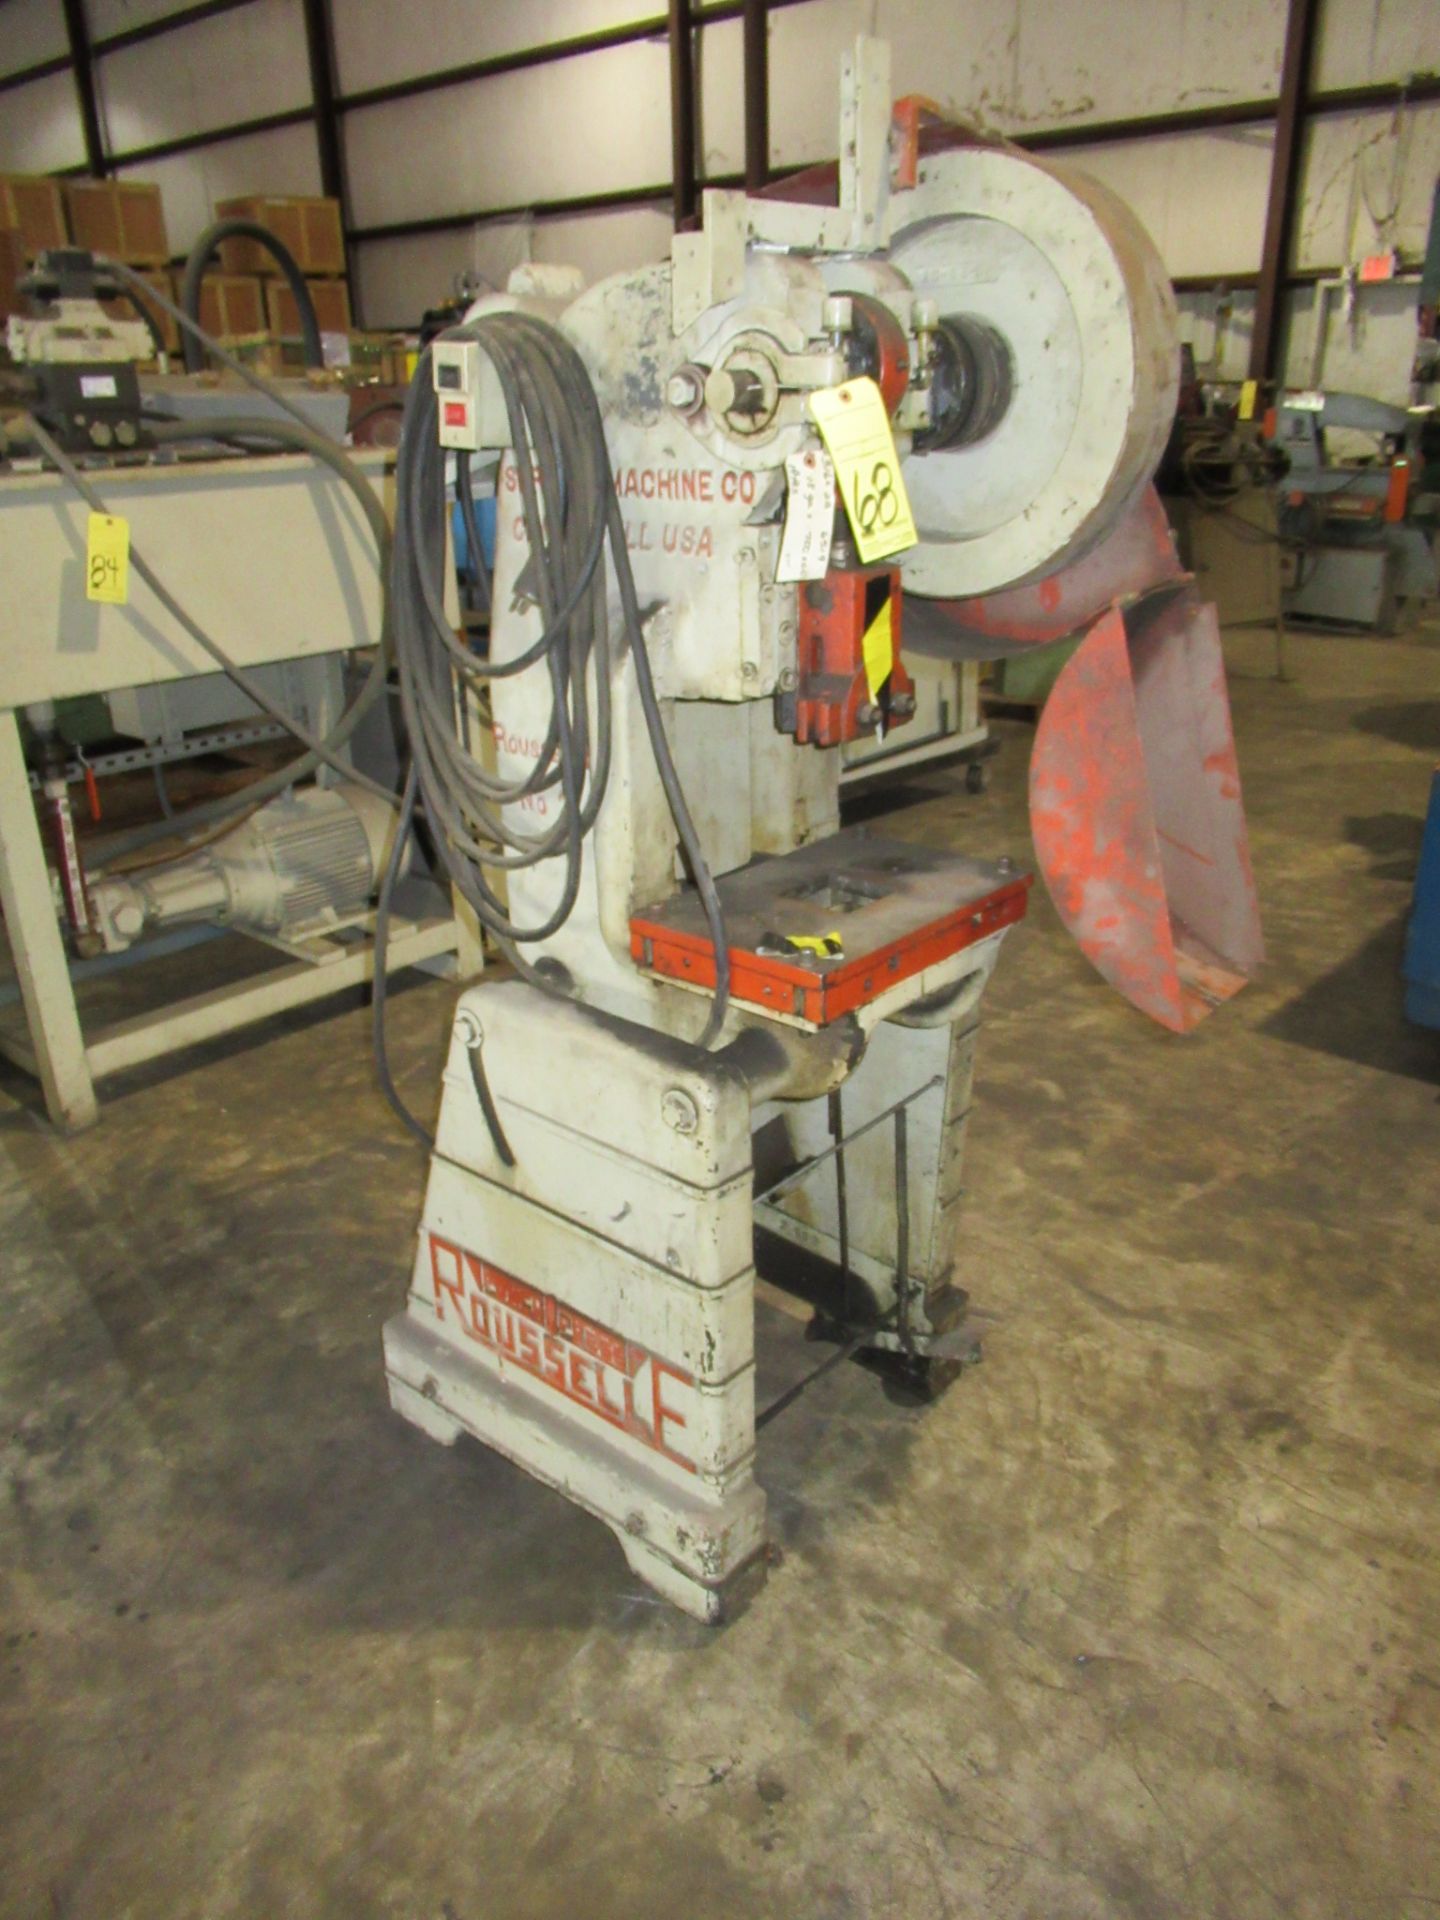 OBI PUNCH PRESS, ROUSSELLE MDL. 2, 11 x 17 table, S/N 1065 (Location D: Specialized Manufacturing,